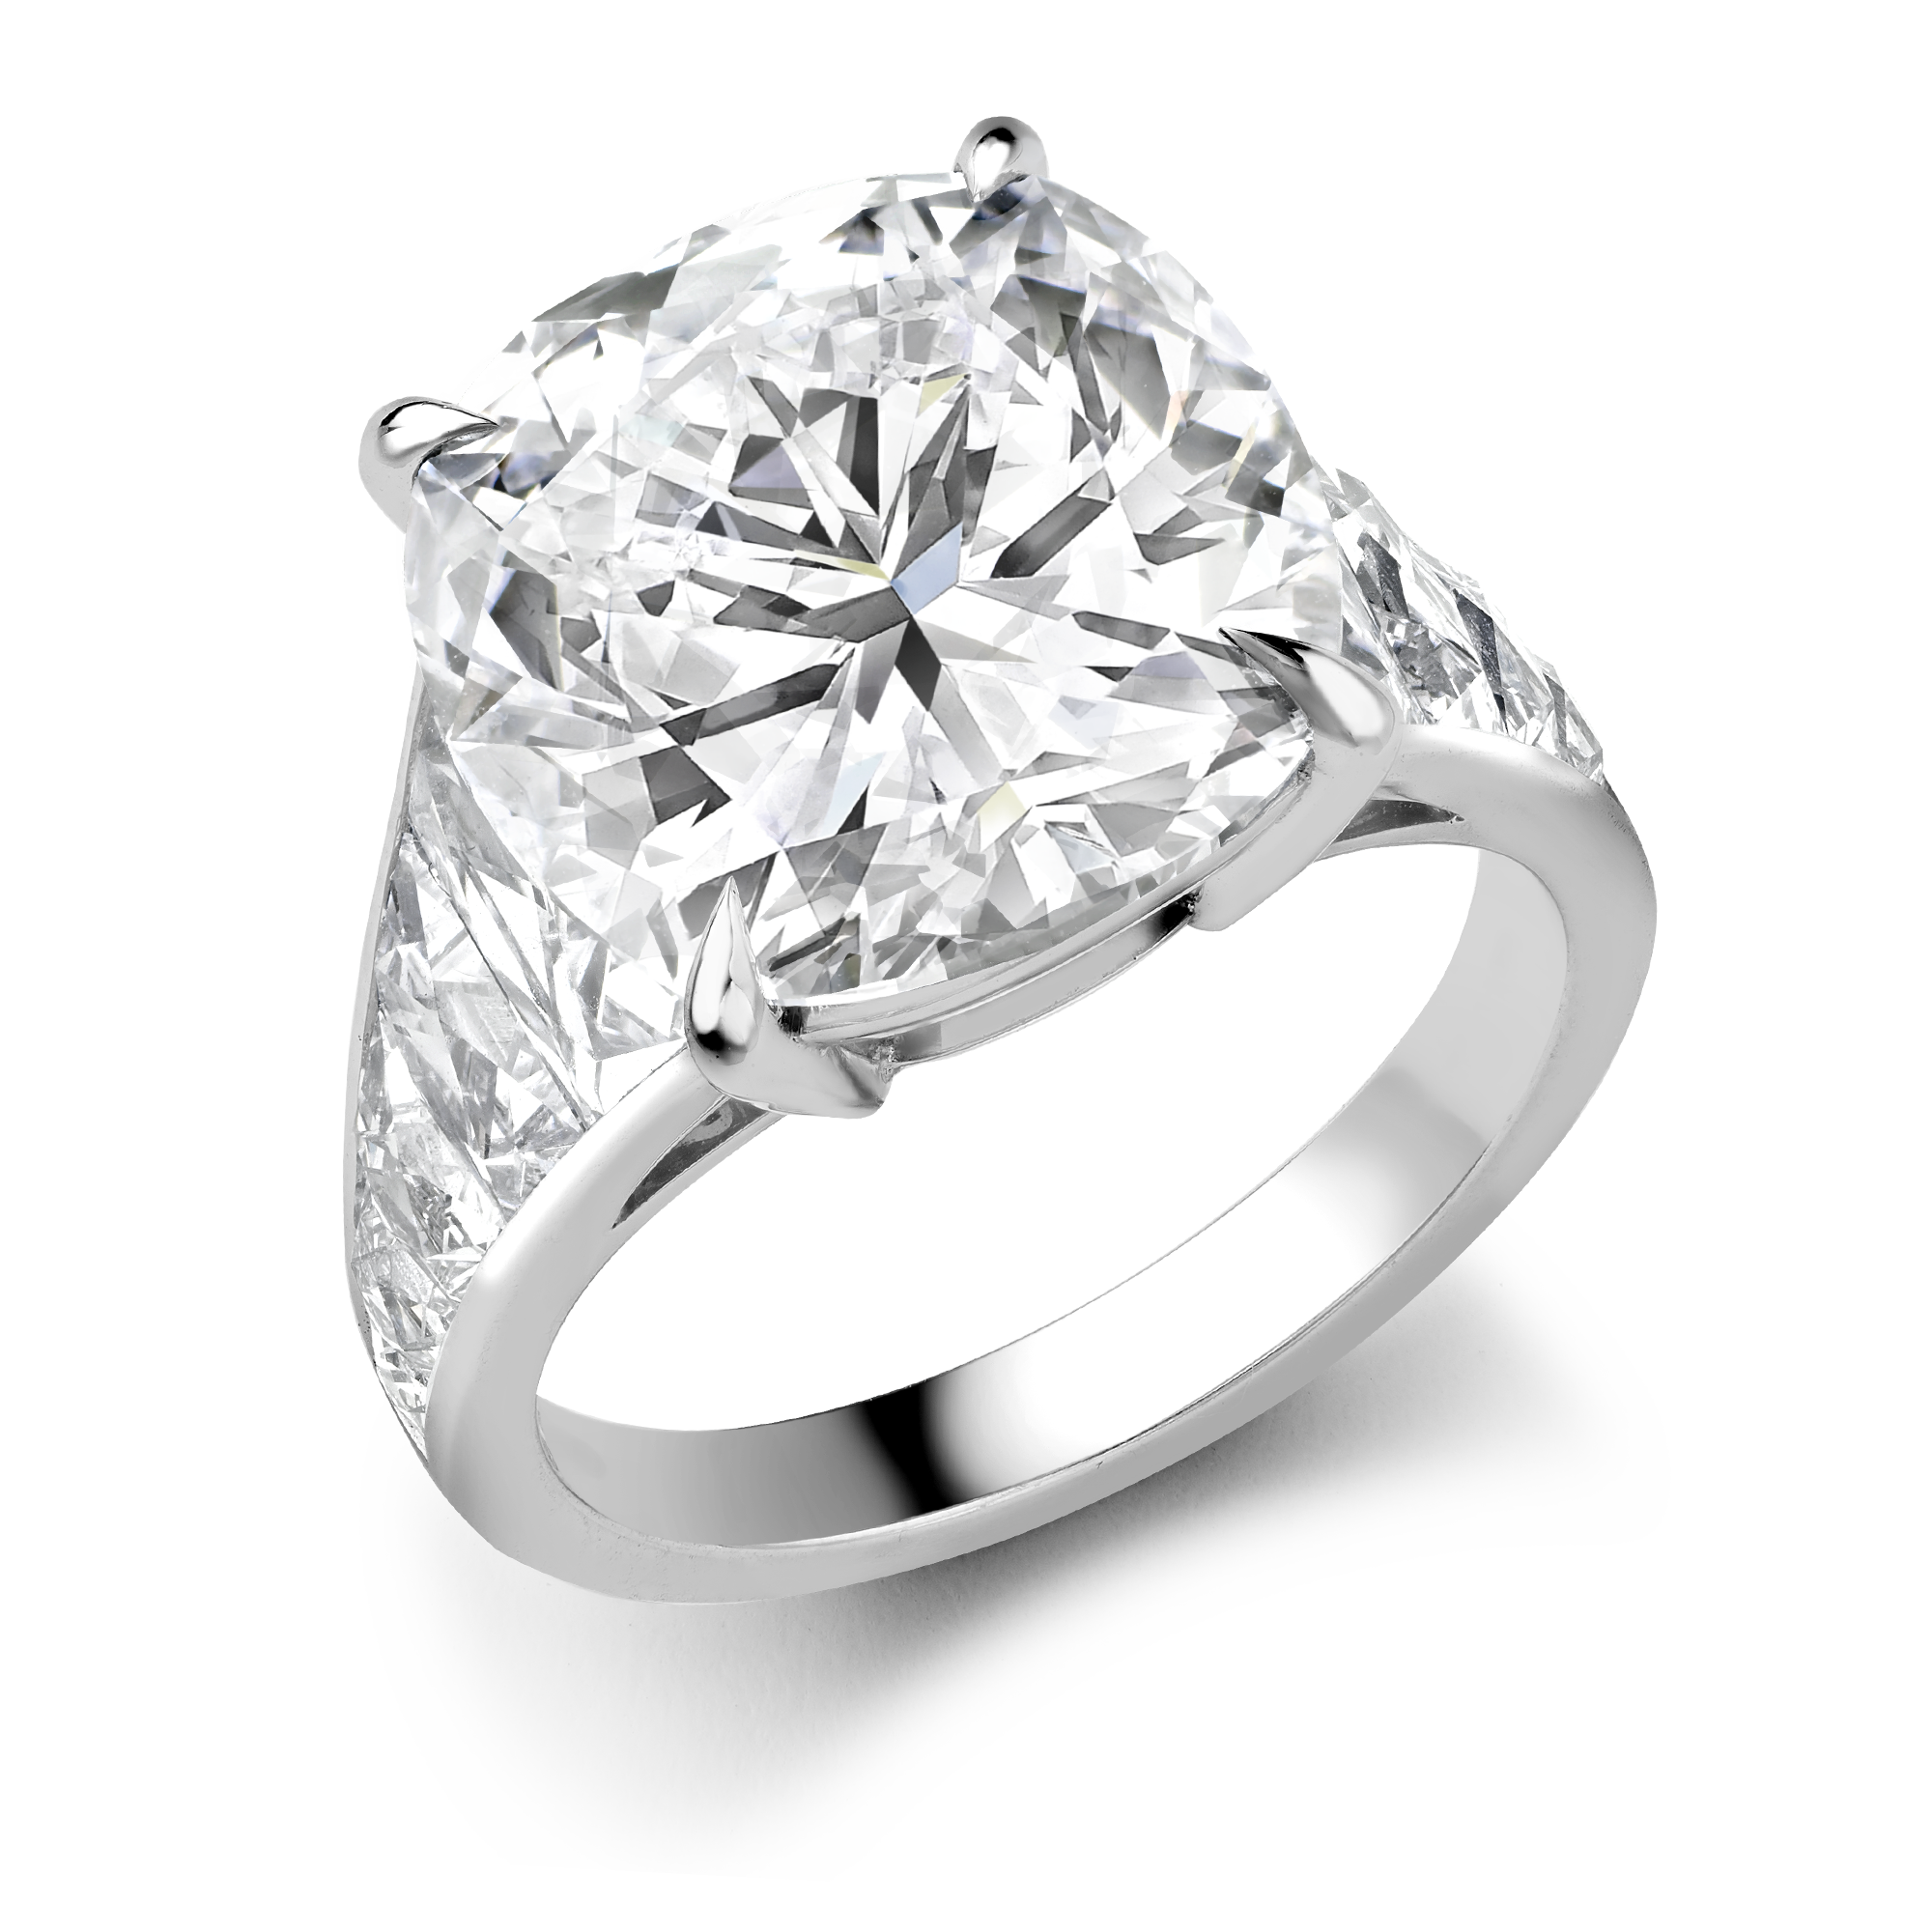 Masterpiece Pragnell Setting Diamond Ring with Tapered French Cut Diamond Shoulders Antique Cushion Cut, Four Claw Set, GIA Certified_1